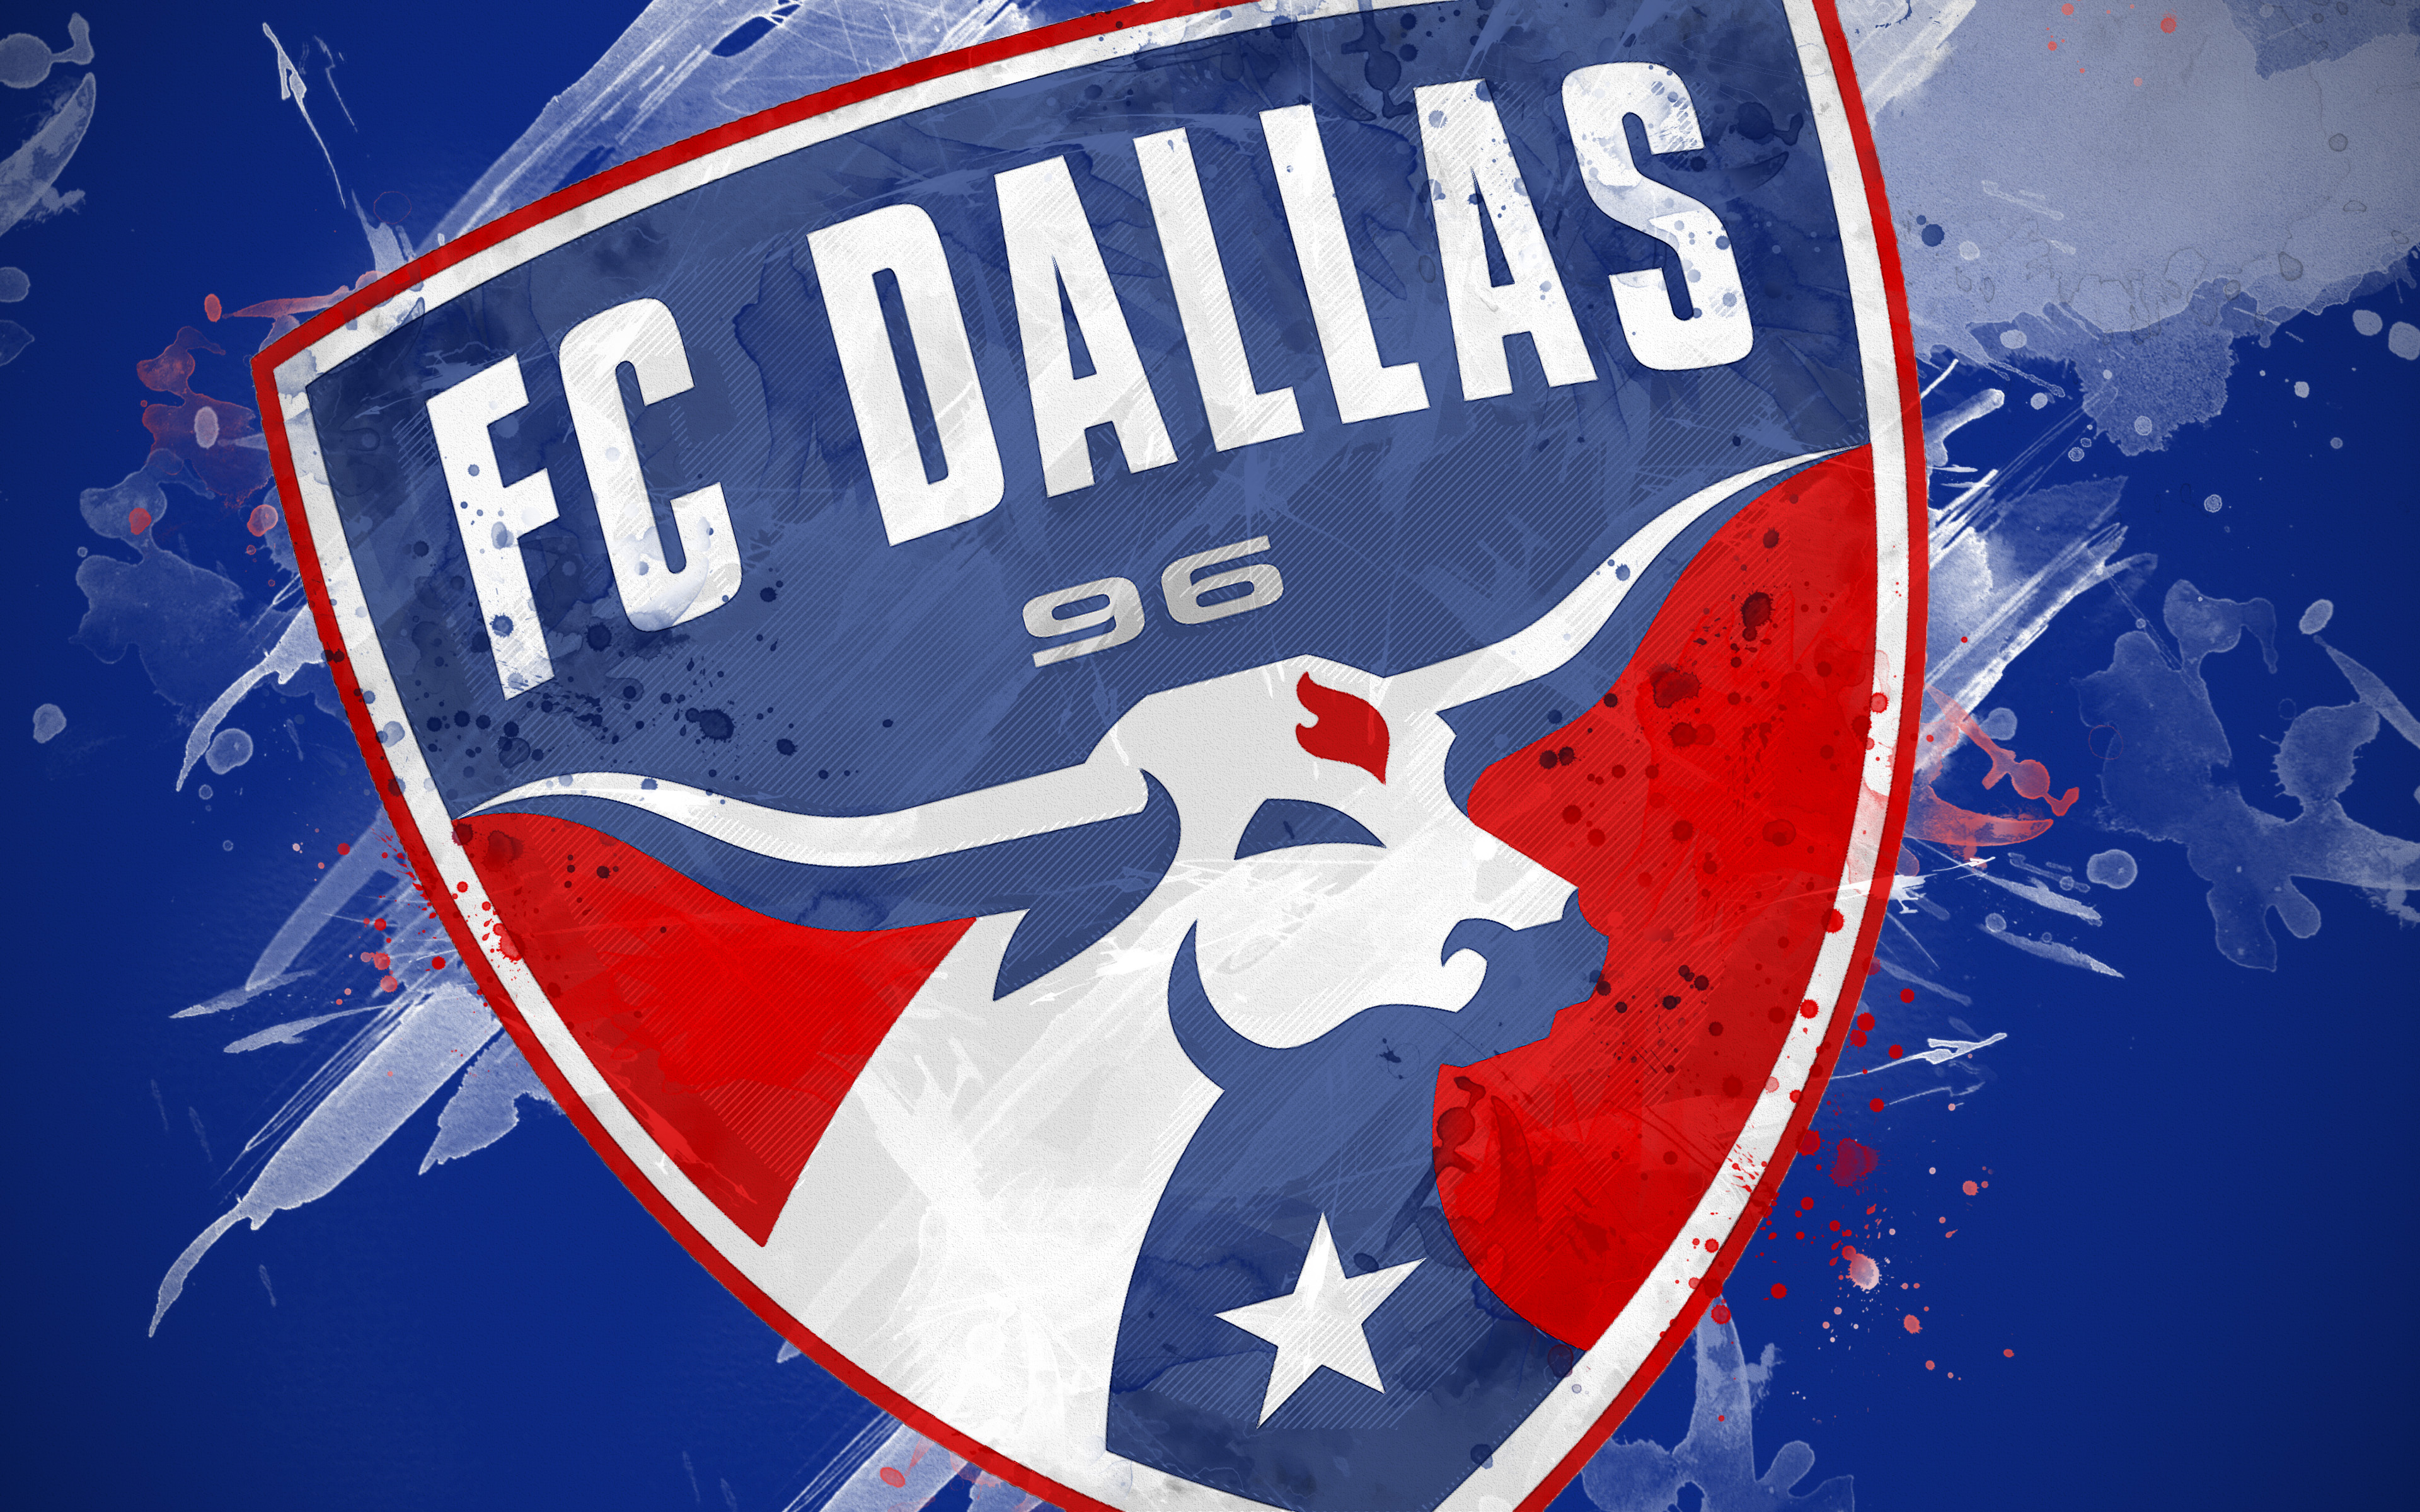 FC Dallas on X: Download a fresh background for your 💻! Both horizontal  and vertical graphics available:    / X